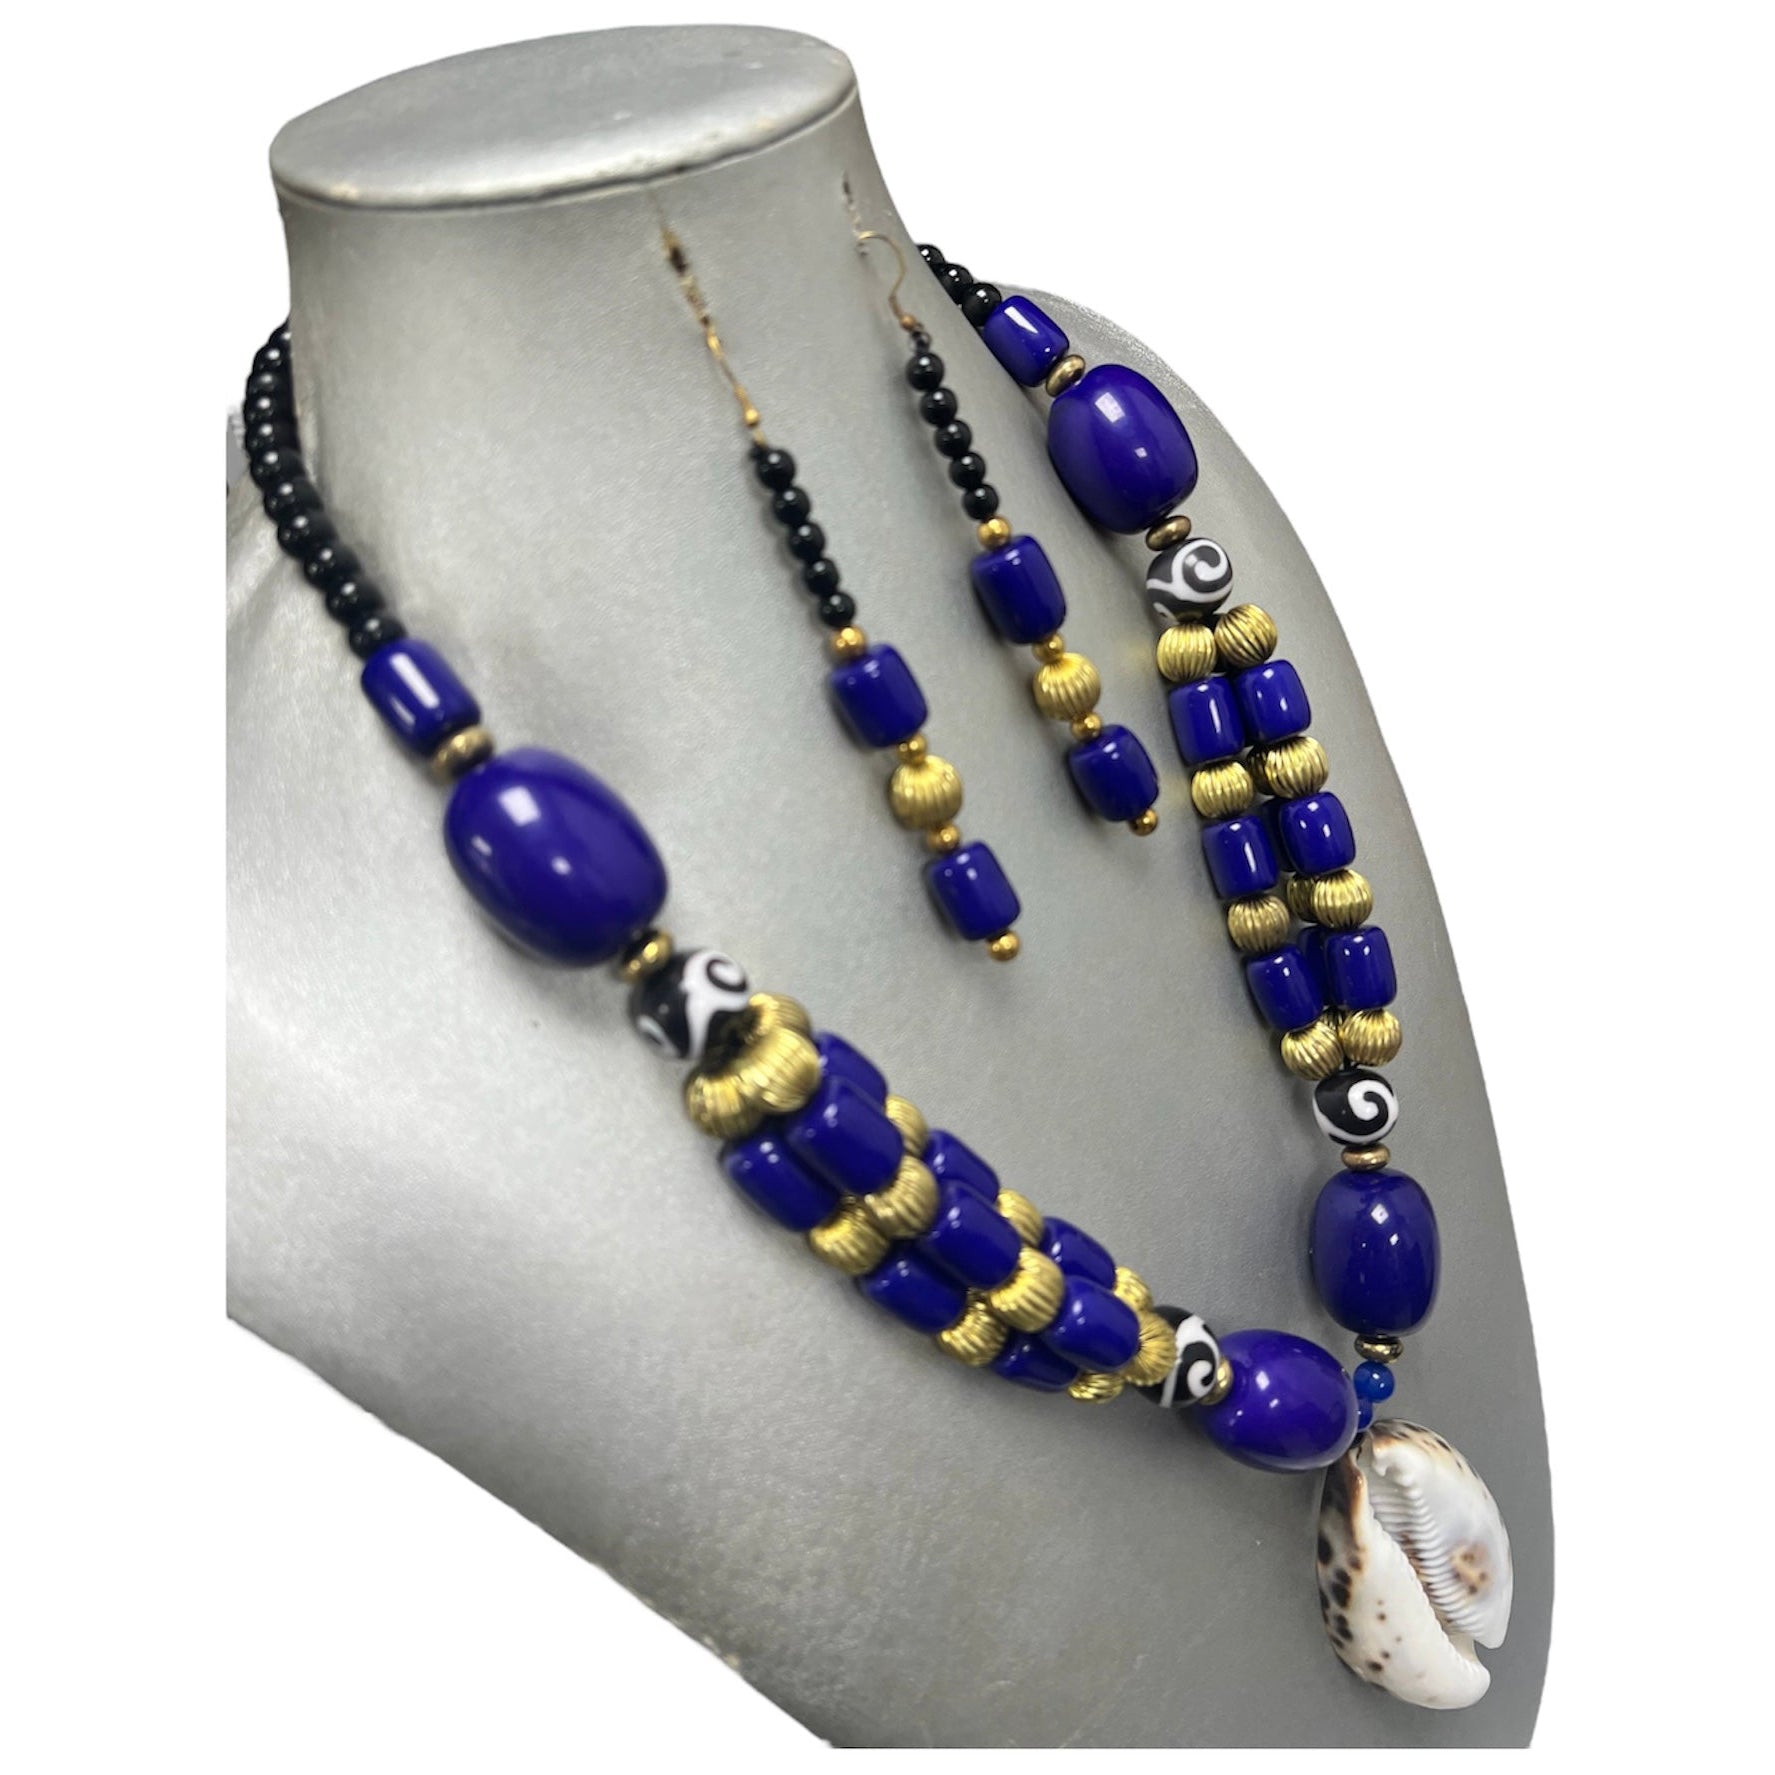 Women's African Necklace Set With Large Cowrie Shell Pendant -- Jewelry 52